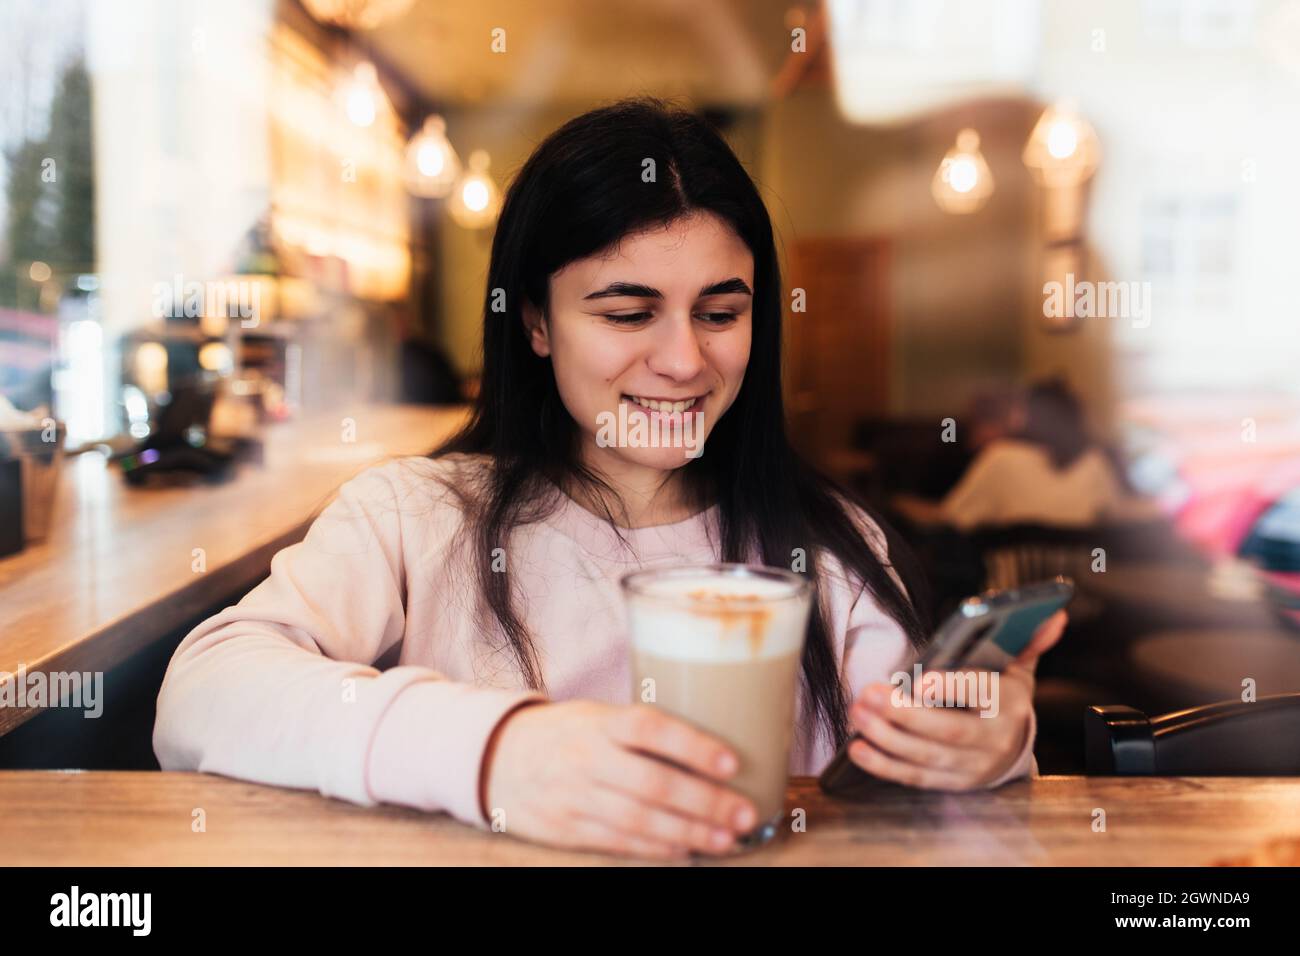 Girl Smiling, Drinks Coffee In Cafe And Reading Phone. Blurred Background. High Quality Photo Stock Photo